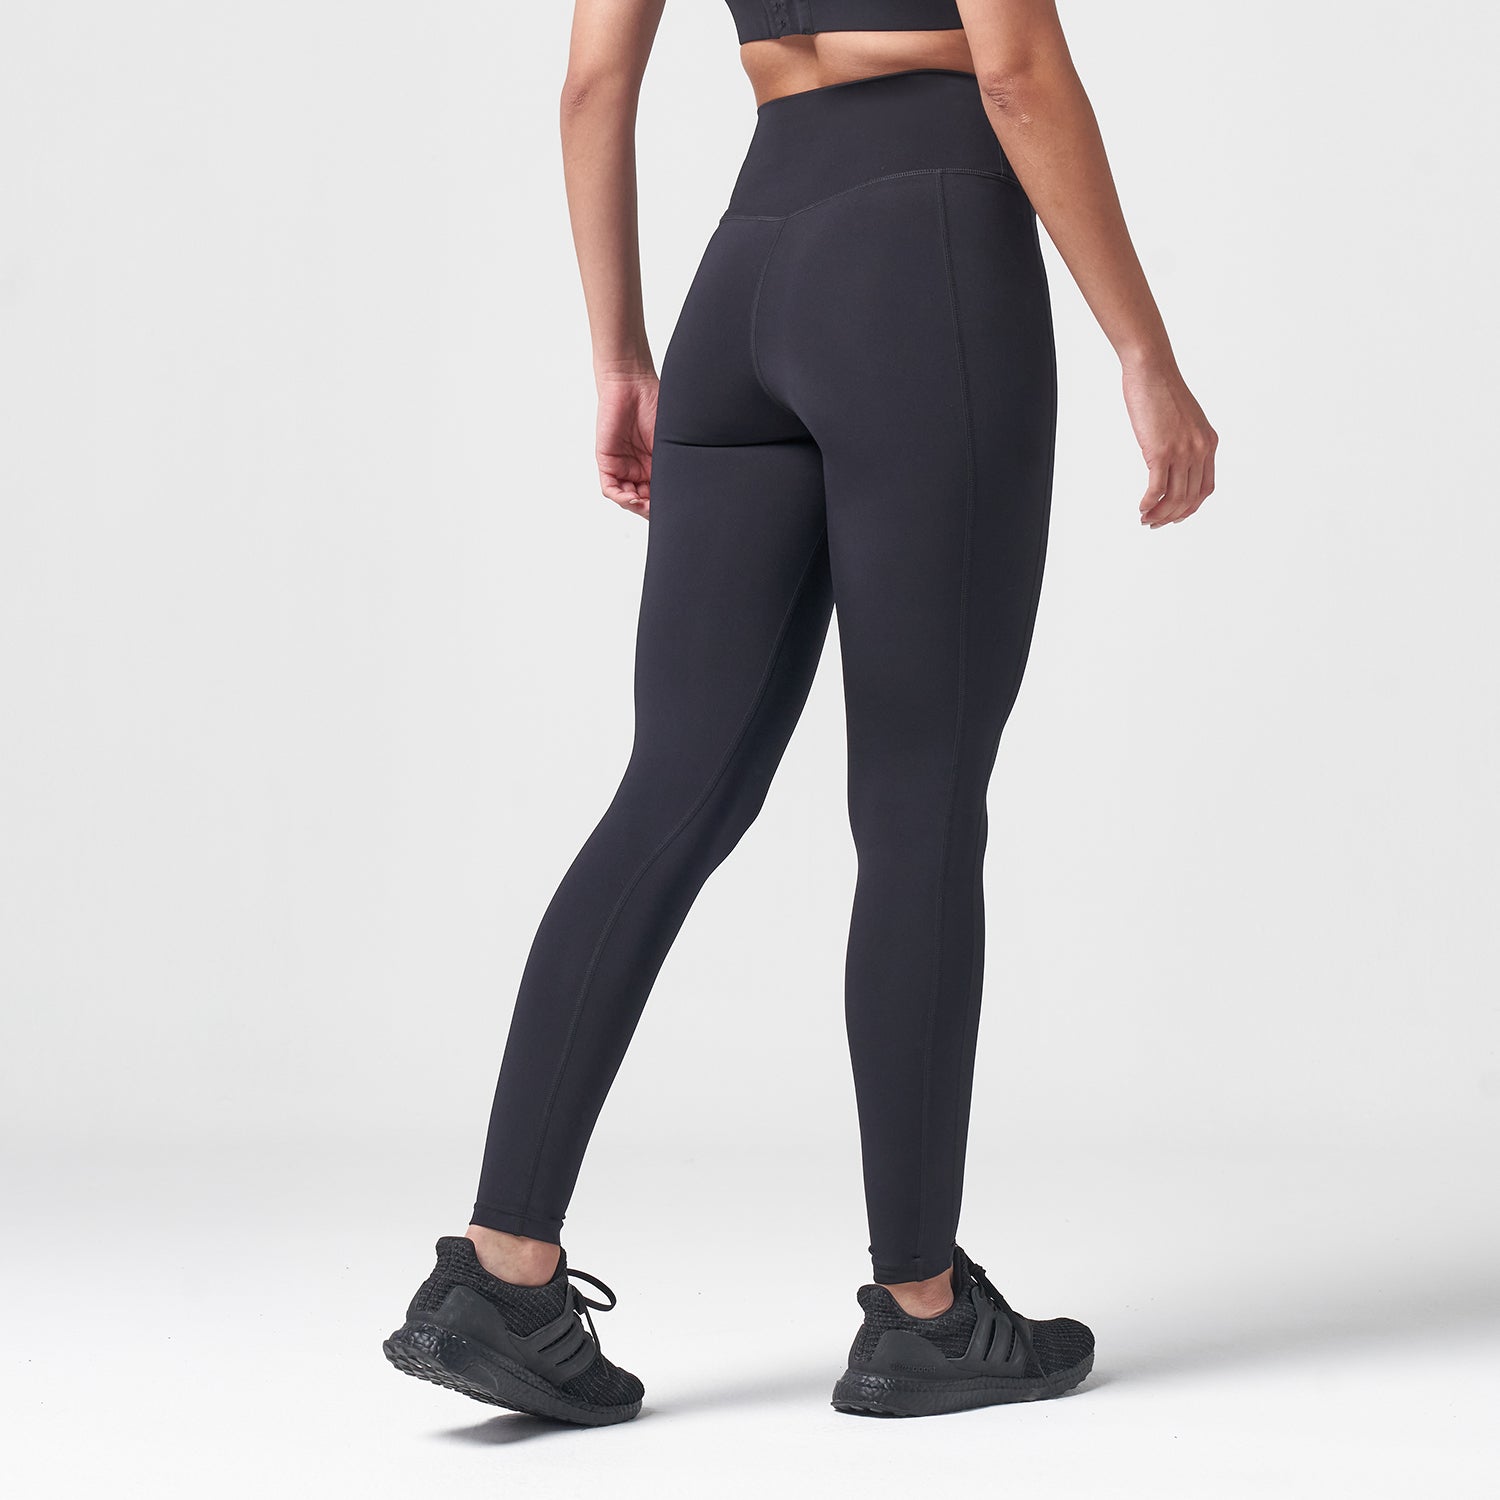 squatwolf-workout-clothes-essential-high-waisted-leggings-black-gym-leggings-for-women